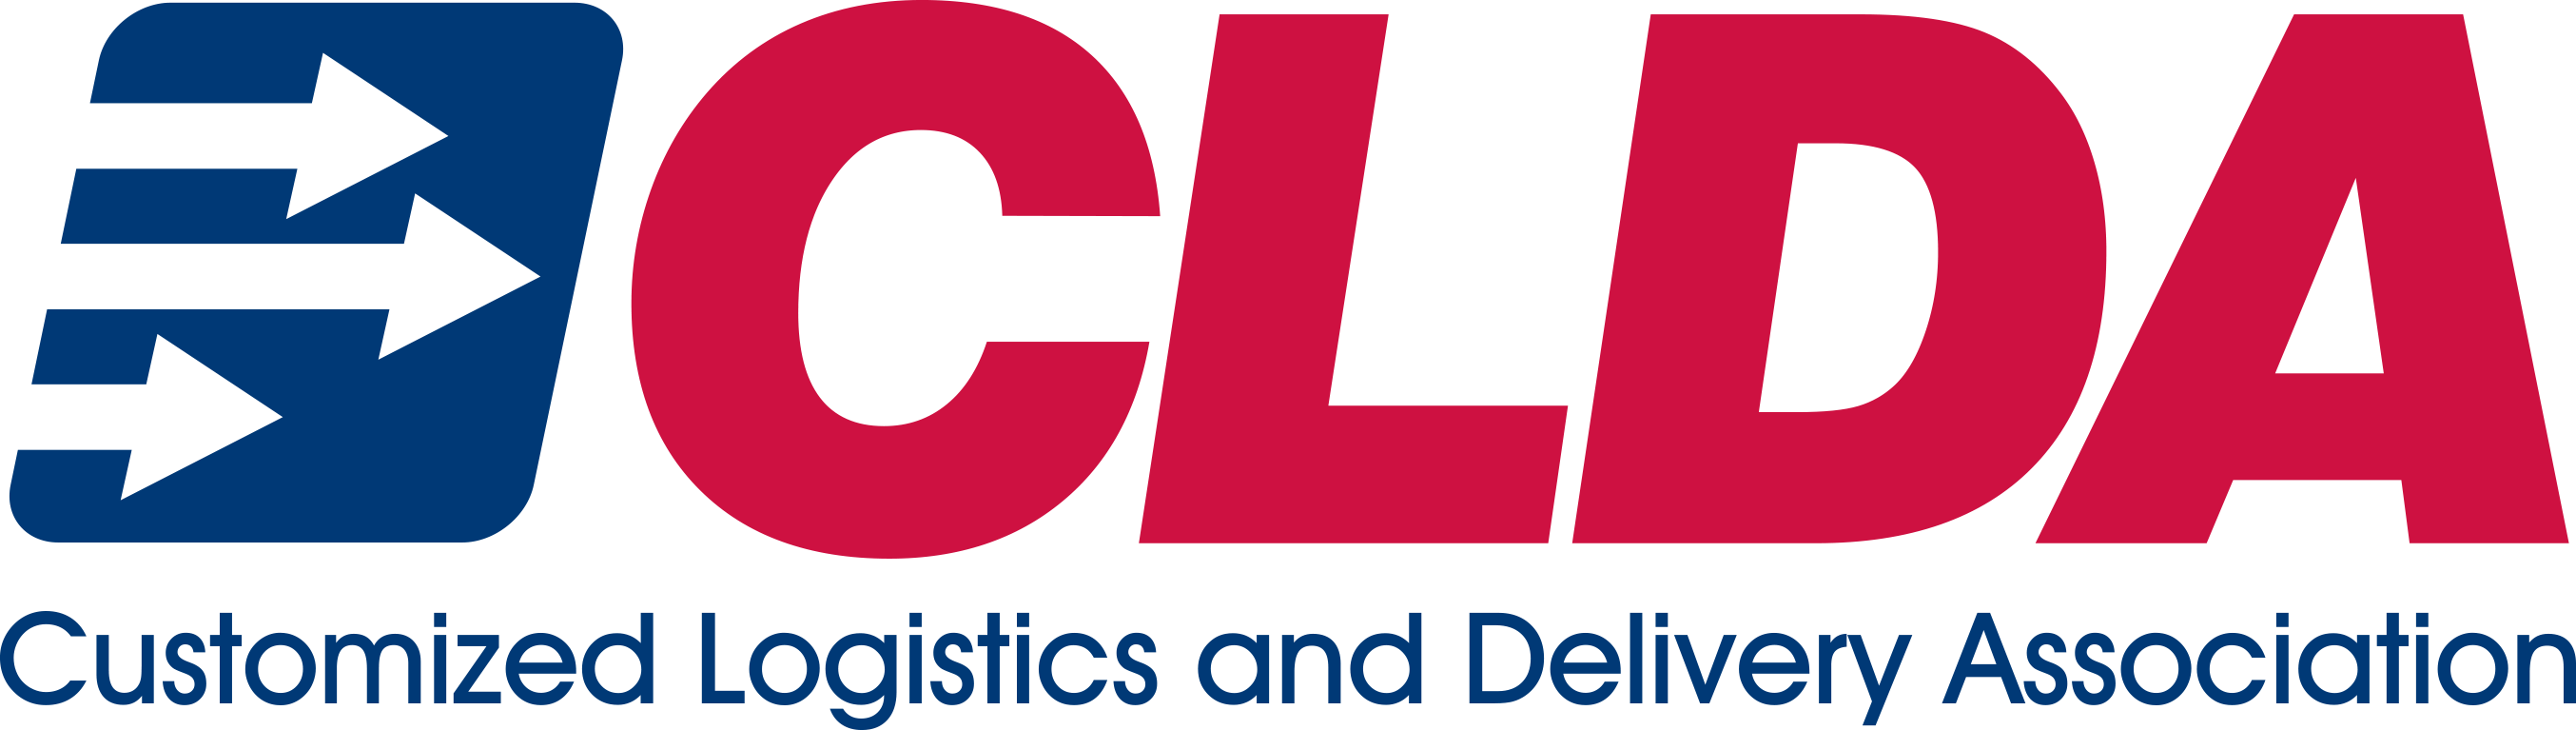 Customized Logistics and Delivery Association Logo